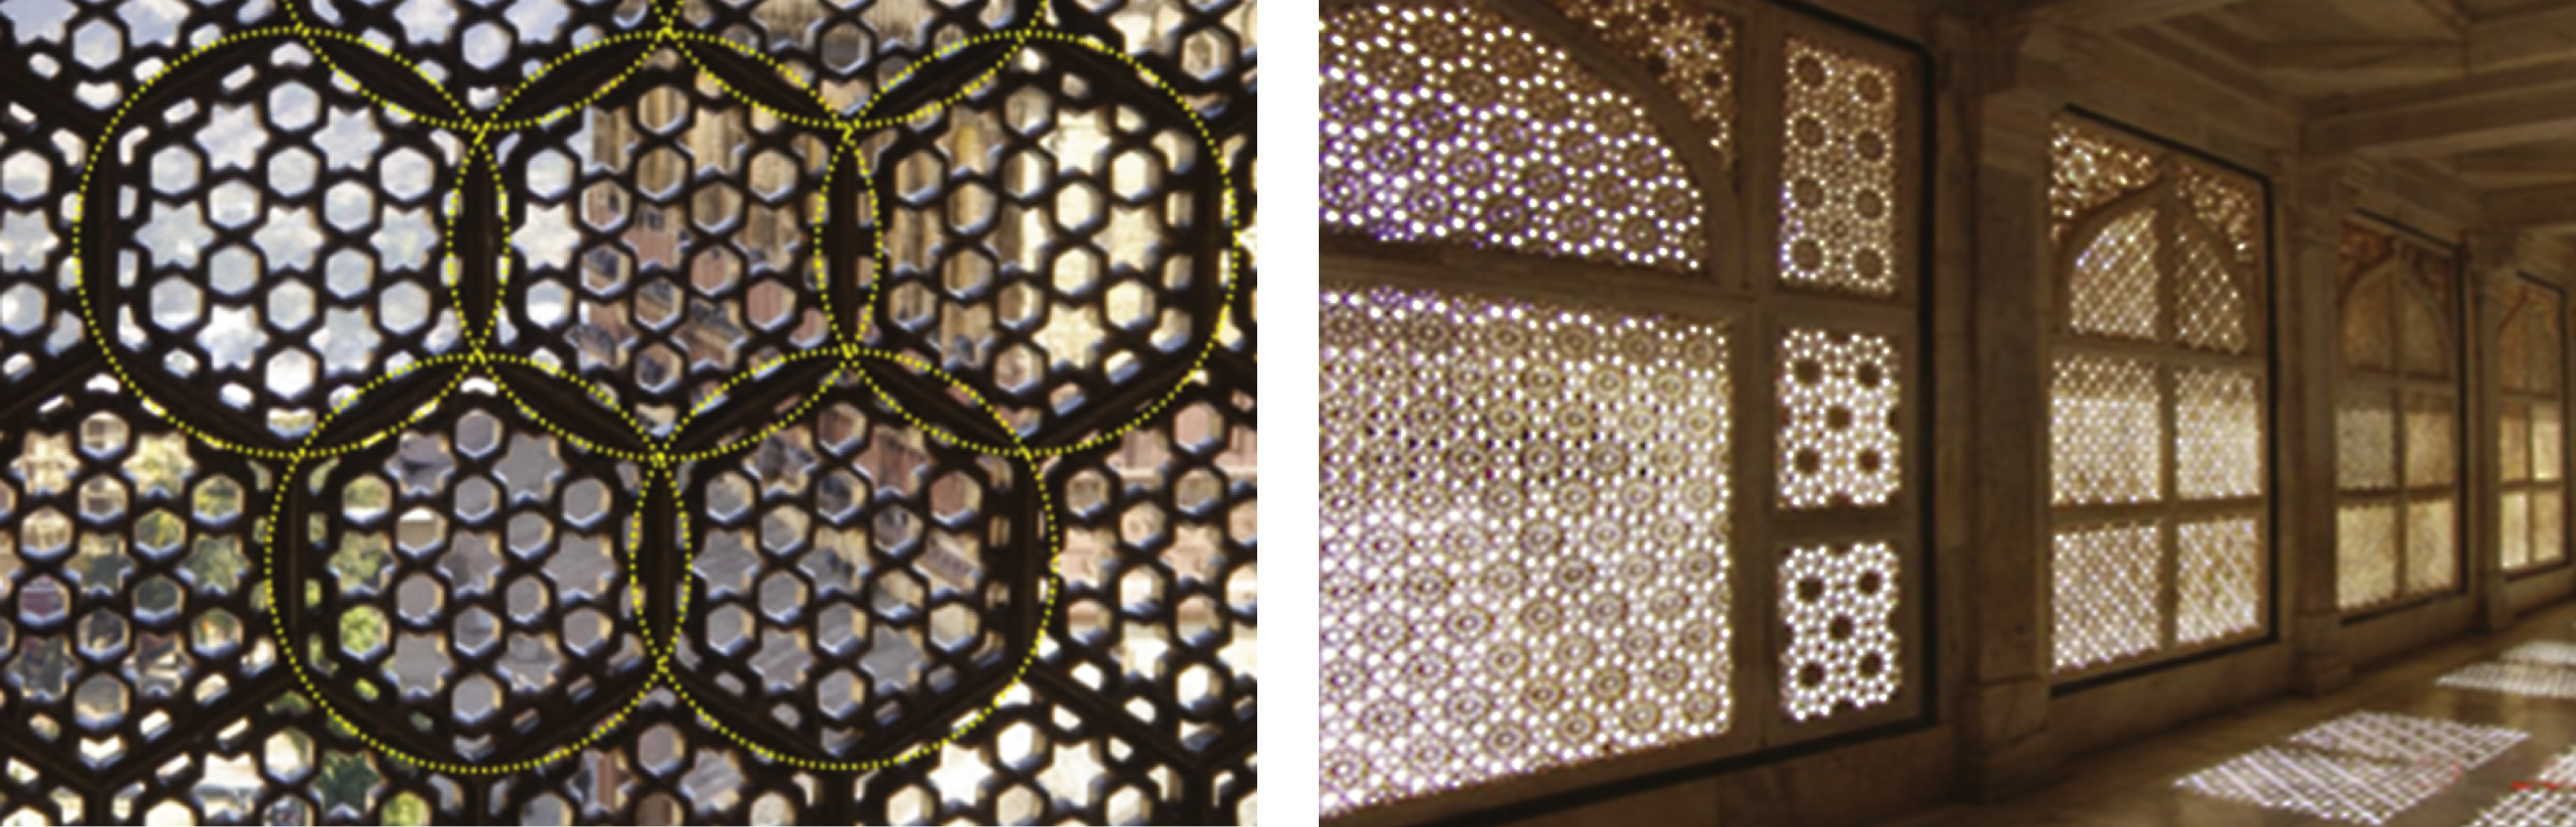 Circles and spheres form the base of Islamic geometric compositions. Examples of this are found in mashrabiya, such as those applied in Sheikh Lotfollah Mosque in Isfahan, Iran (left) and the Taj Mahal (right).